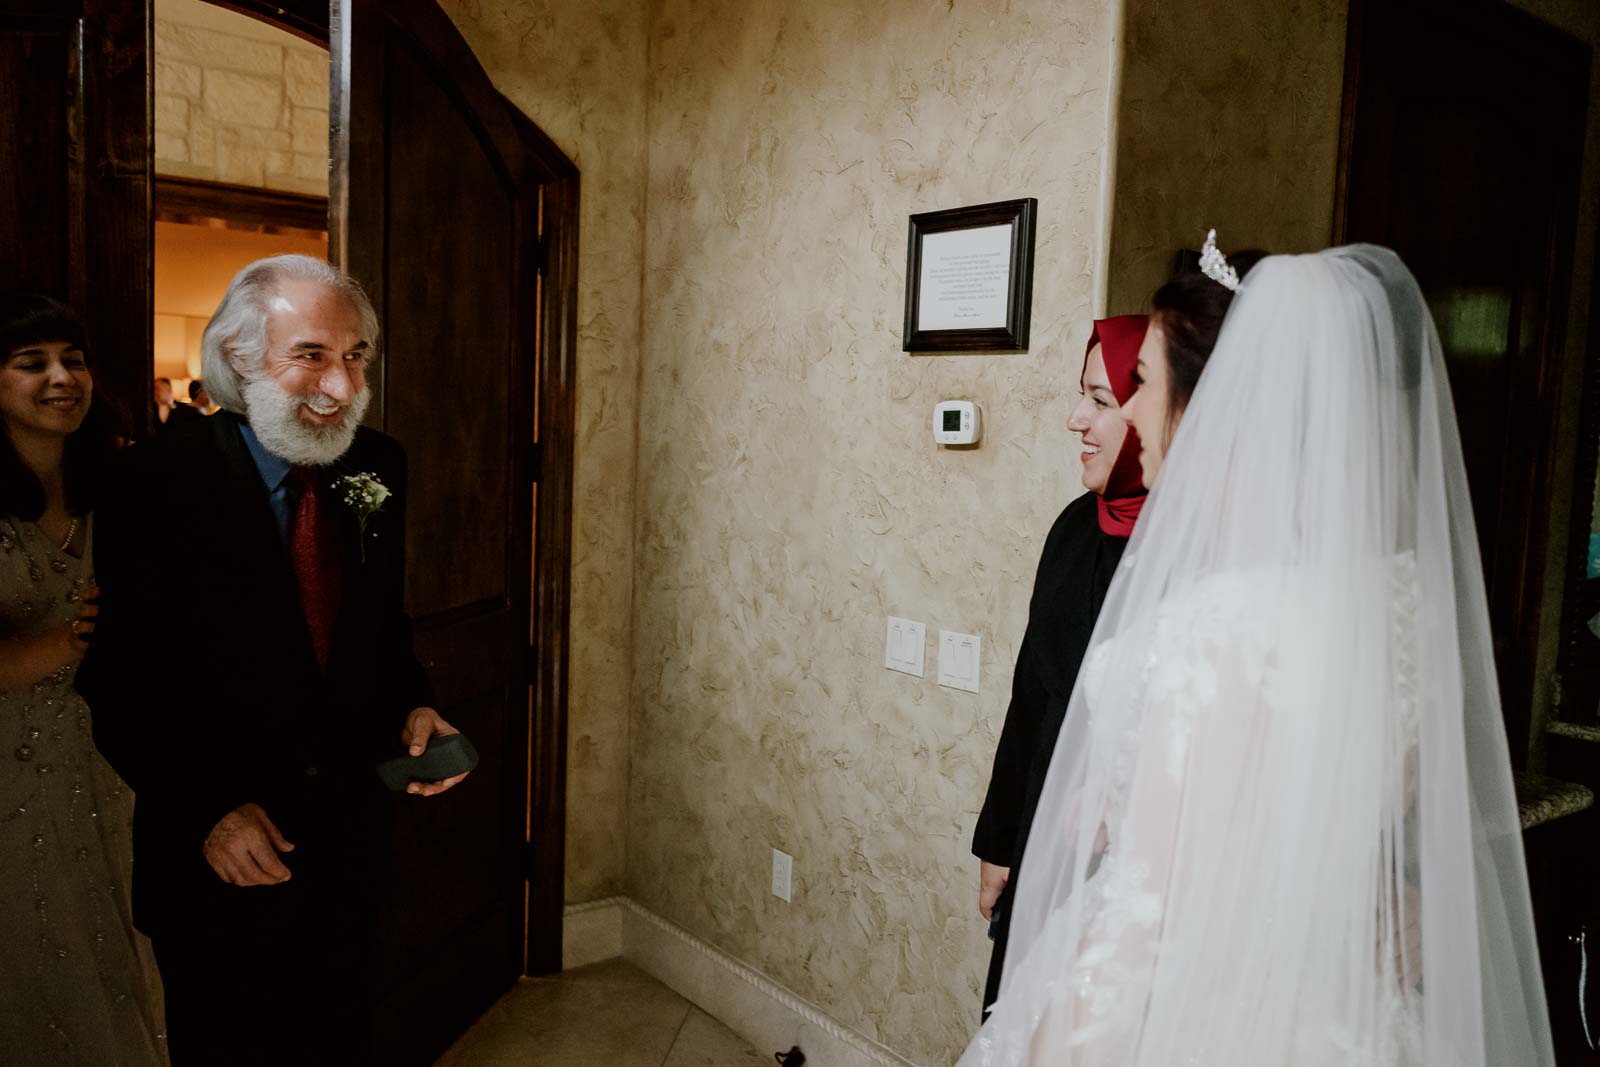 The father of the bride is delighted the beaming smile as he sees his daughter for the first time dress as a bride a Turkish wedding